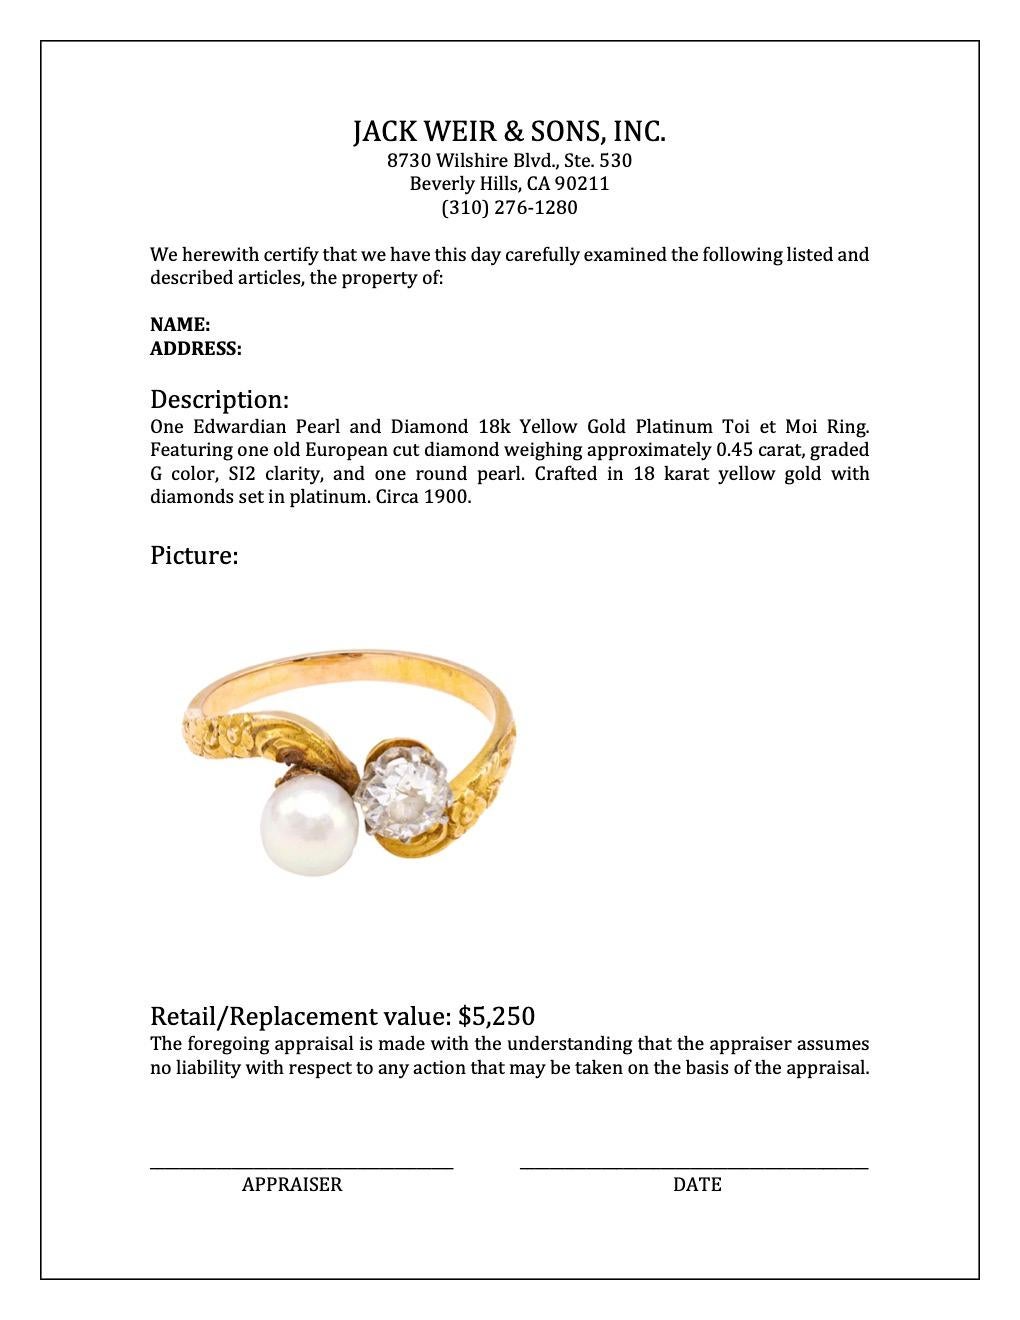 Women's or Men's Edwardian Pearl and Diamond 18k Yellow Gold Platinum Toi et Moi Ring For Sale